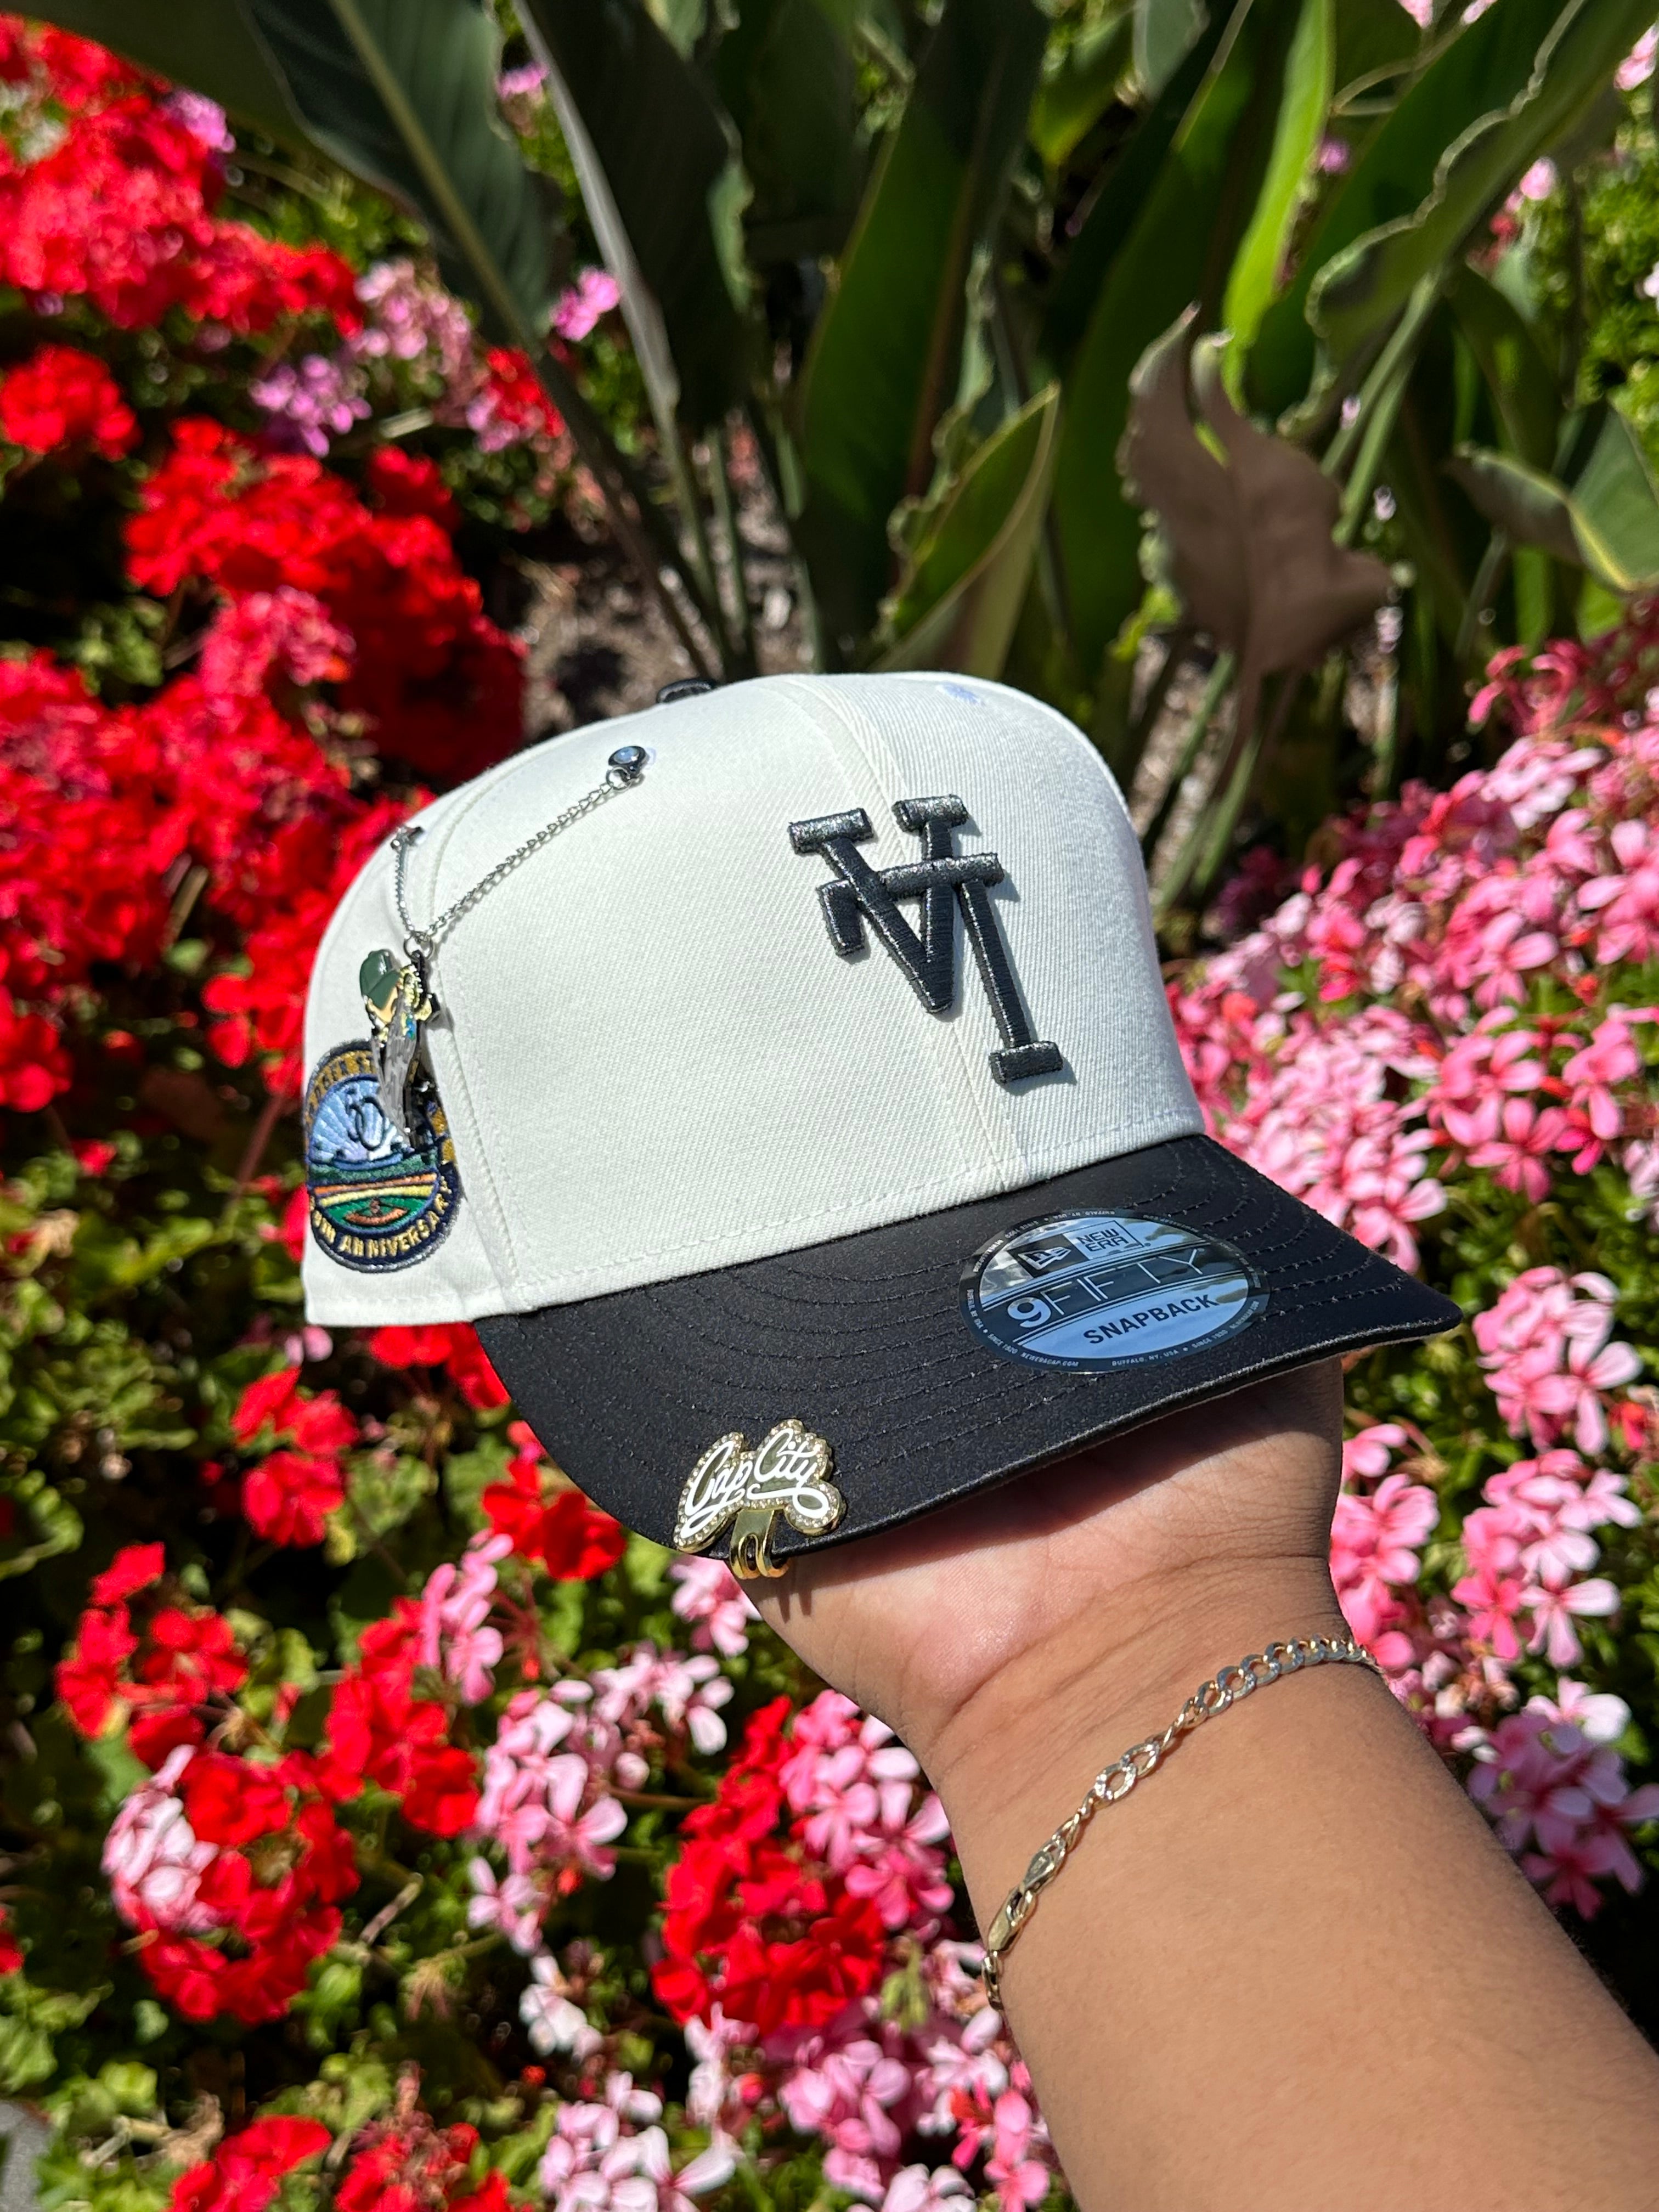 NEW ERA EXCLUSIVE 9FIFTY CHROME WHITE/SATIN UPSIDE DOWN LOS ANGELES DODGERS SNAPBACK W/ 50TH ANNIVERSARY SIDE PATCH